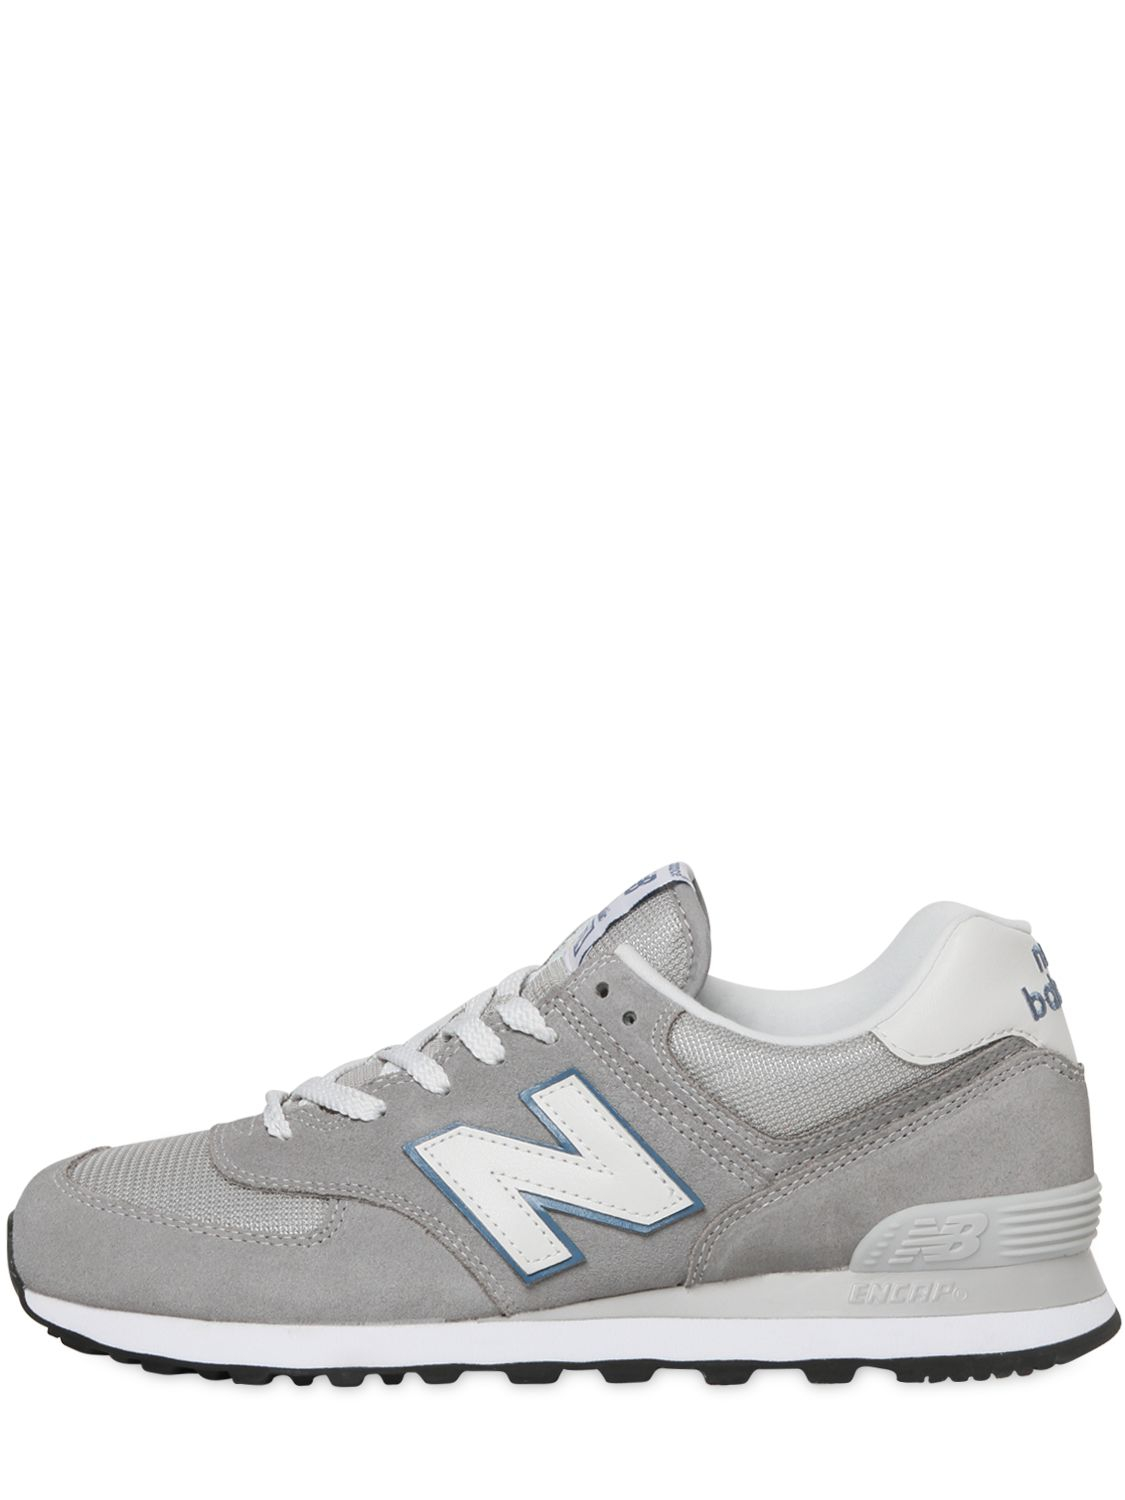 Lyst - New Balance 574 Mesh & Suede Sneakers in Gray for Men